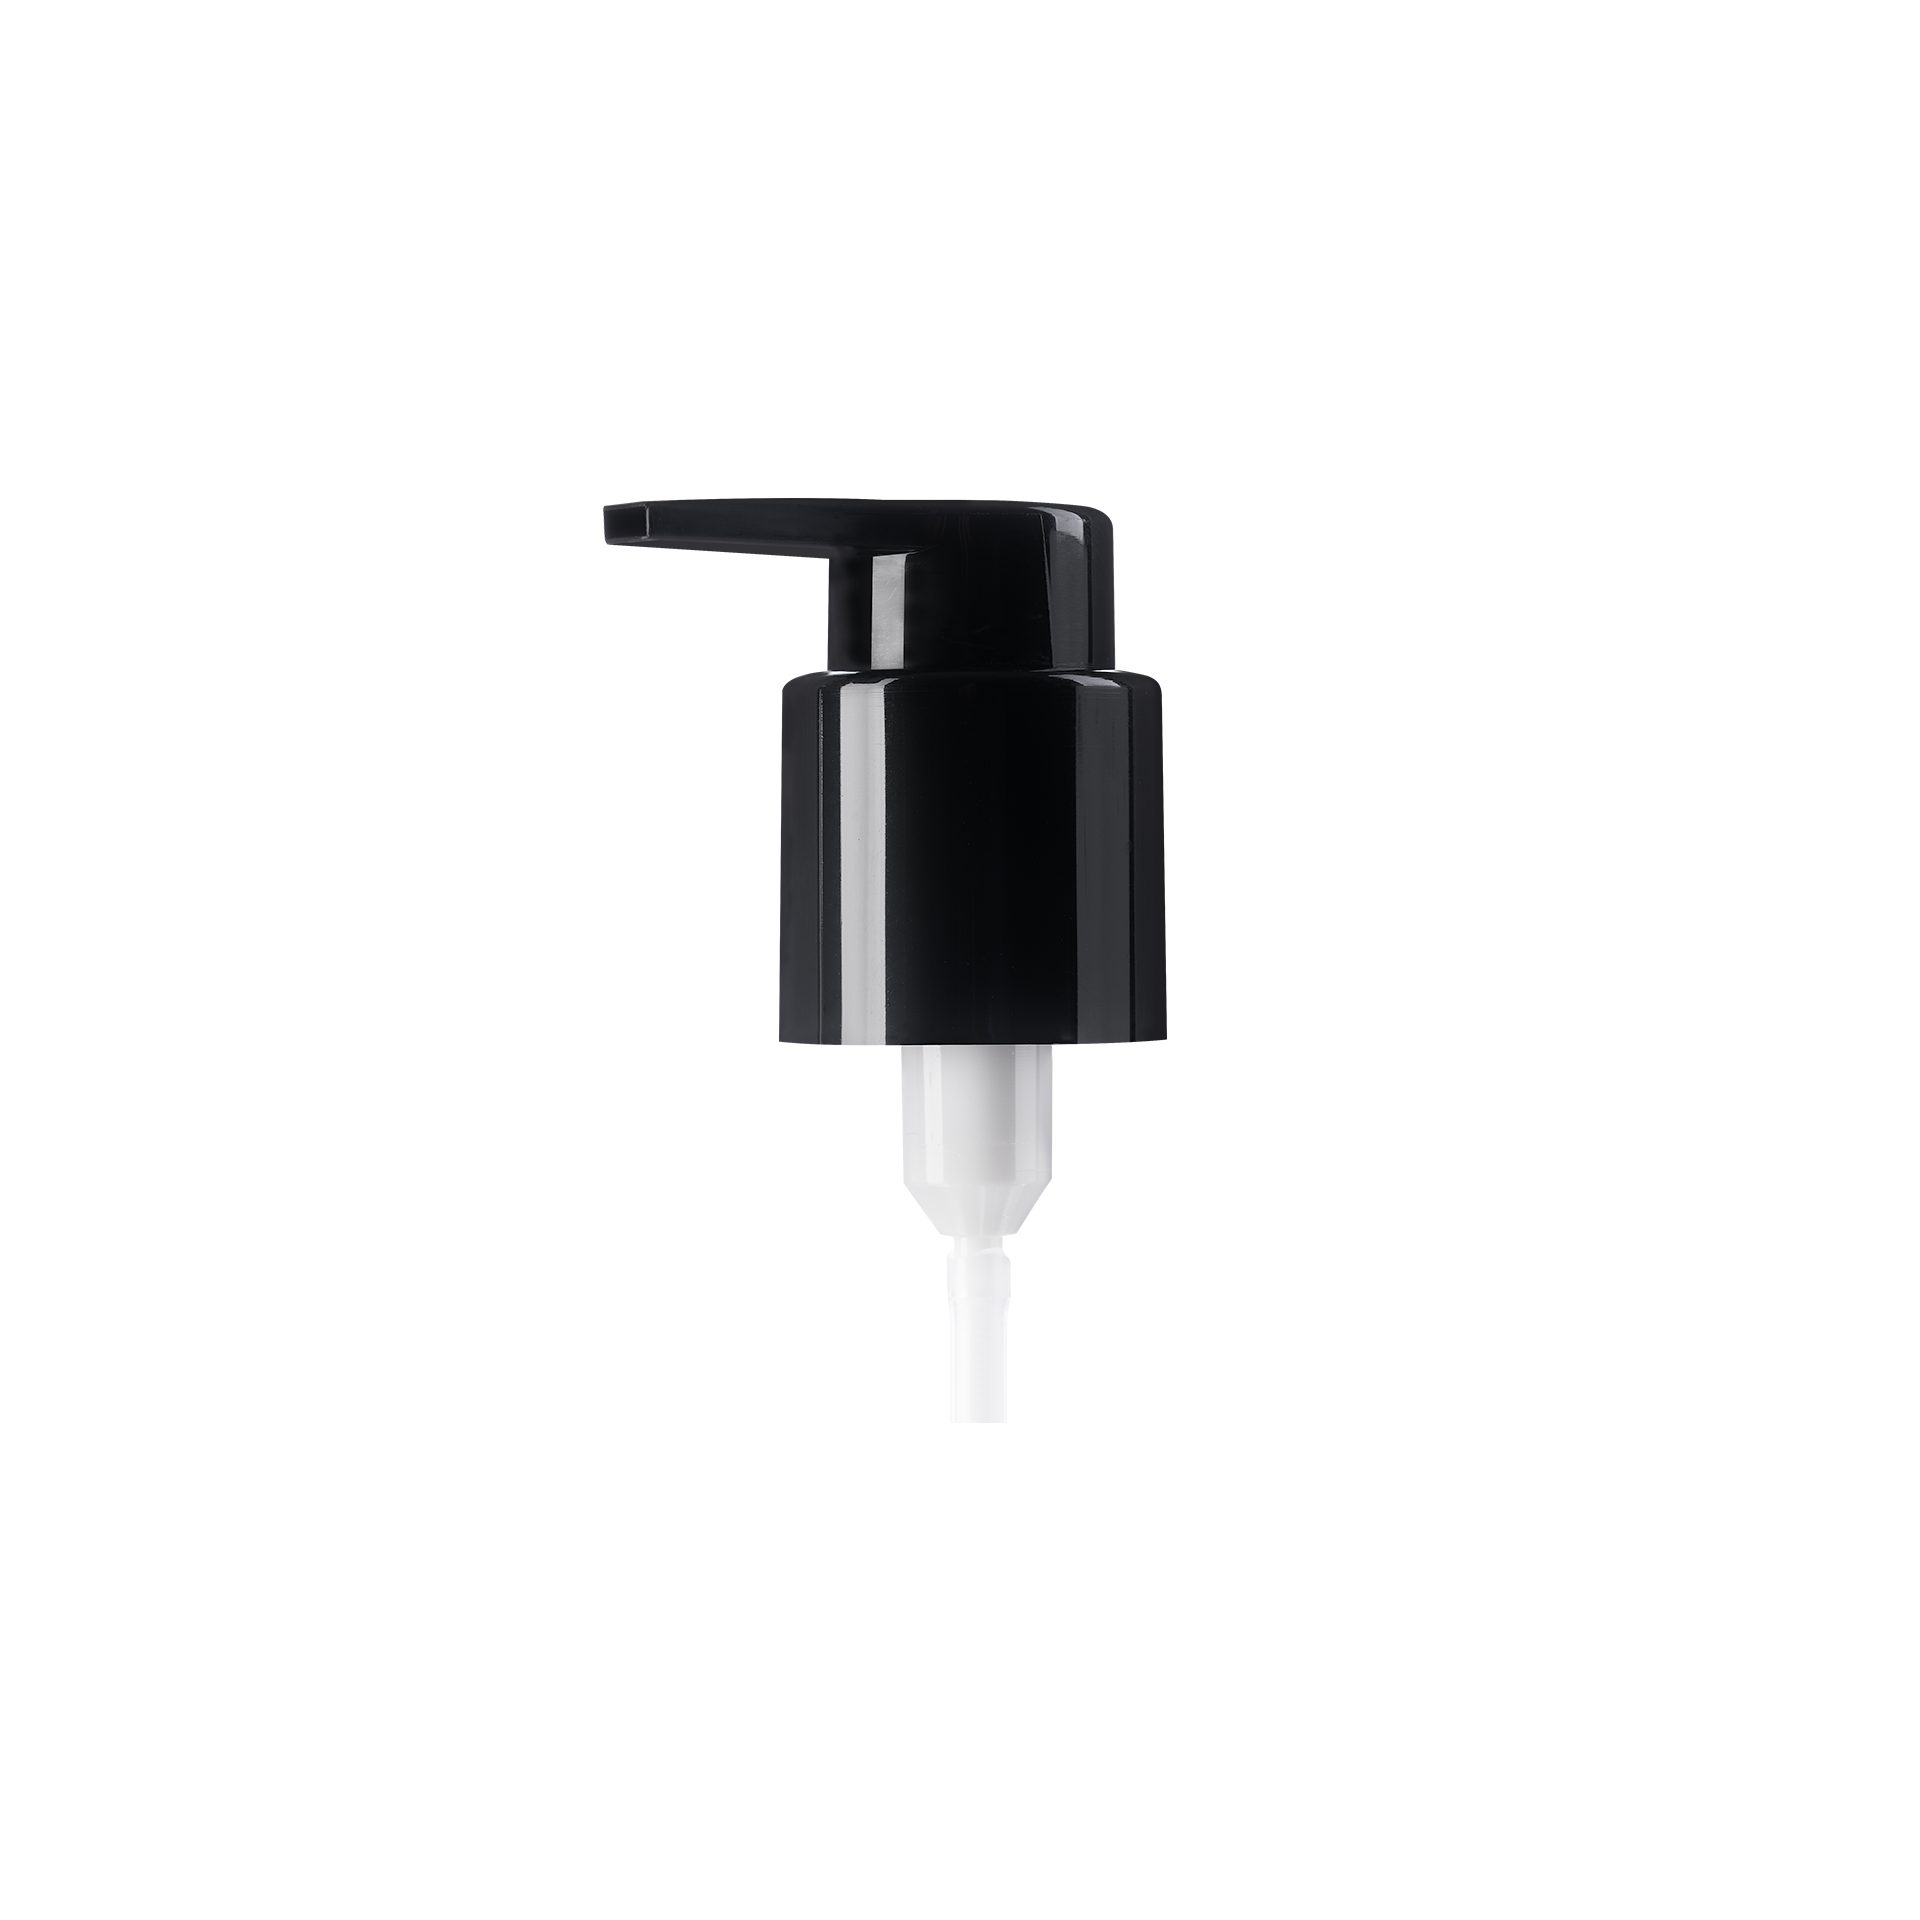 Lotion pump Extended Nozzle 24/410, PP, black, smooth, dose 0.50ml, security clip (Laurel 50)